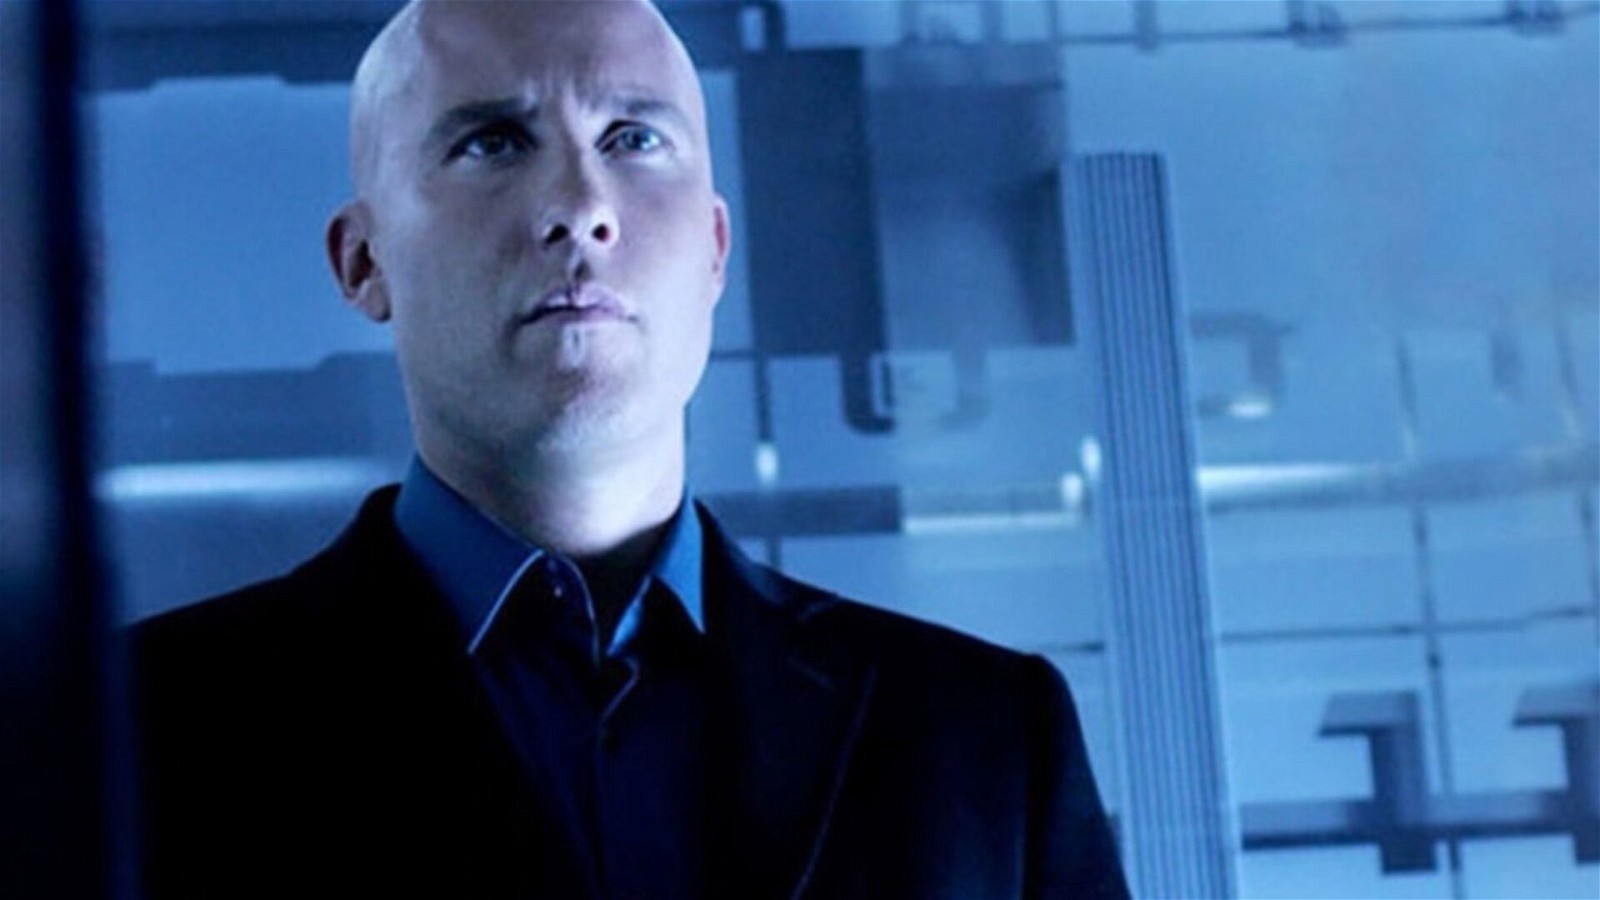 Michael Rosenbaum played Lex Luthor in 7 seaons of Smallville